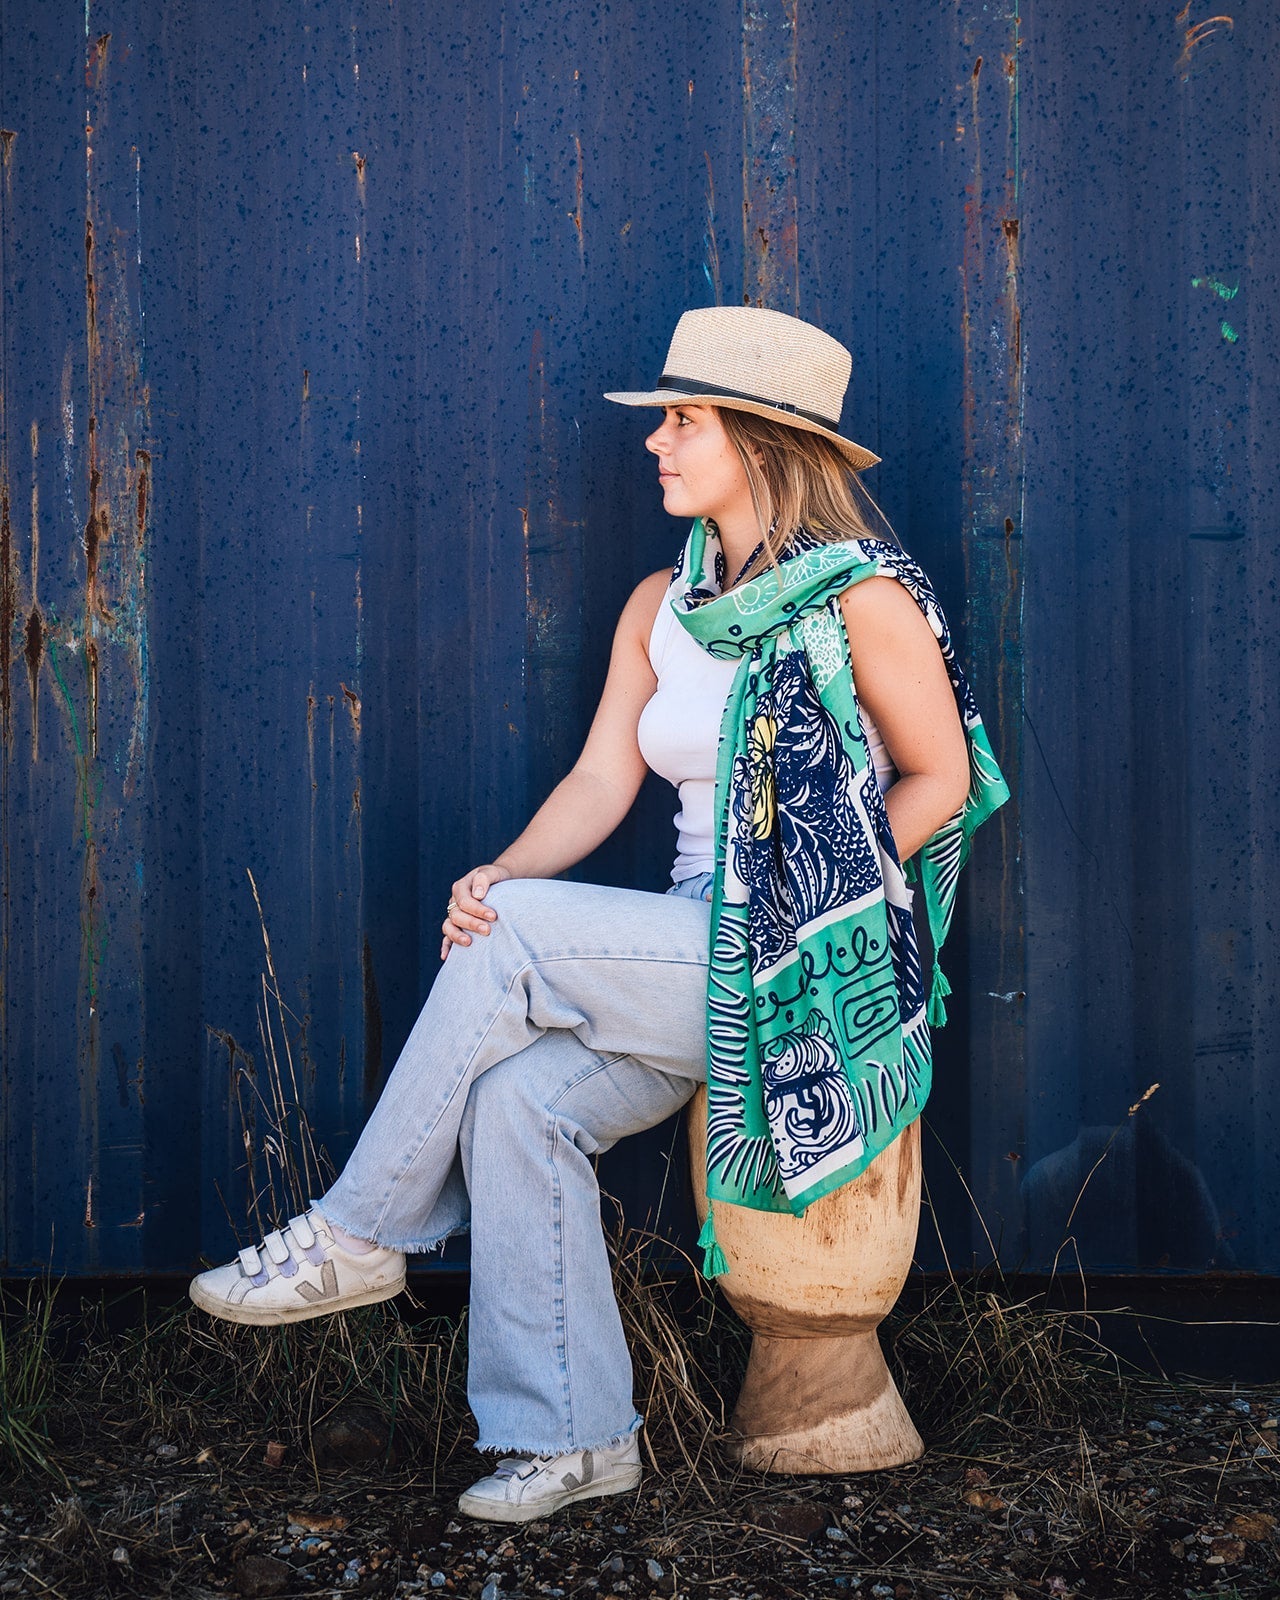 Alana Aloha Women's Scarf: Island-inspired motif in navy, white, and yellow on emerald green, with lively emerald green tassels. Embrace tropical vibes and elevate your style effortlessly!